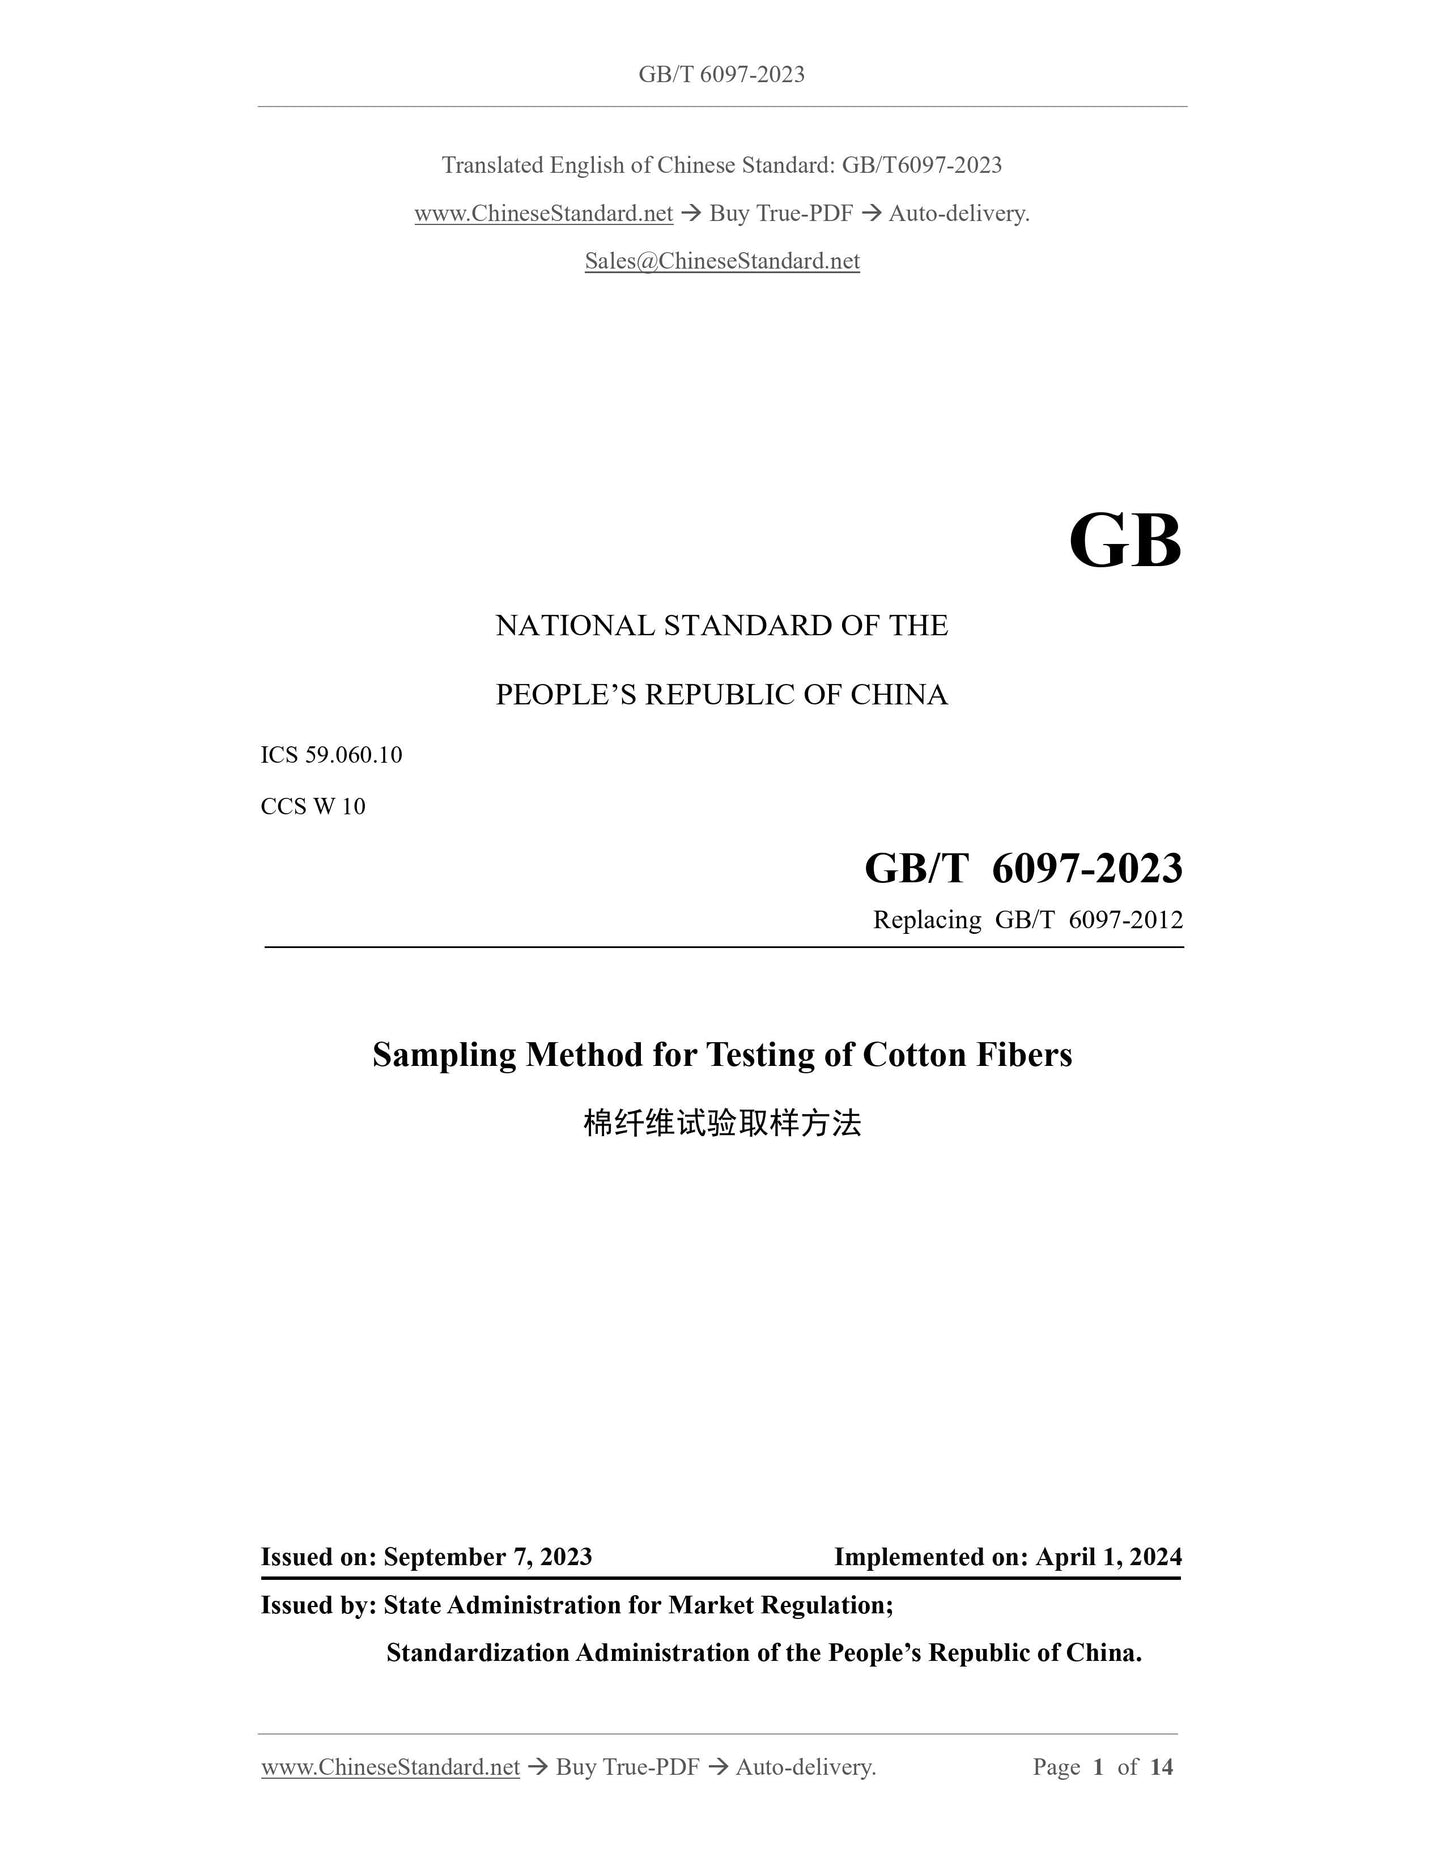 GB/T 6097-2023 Page 1